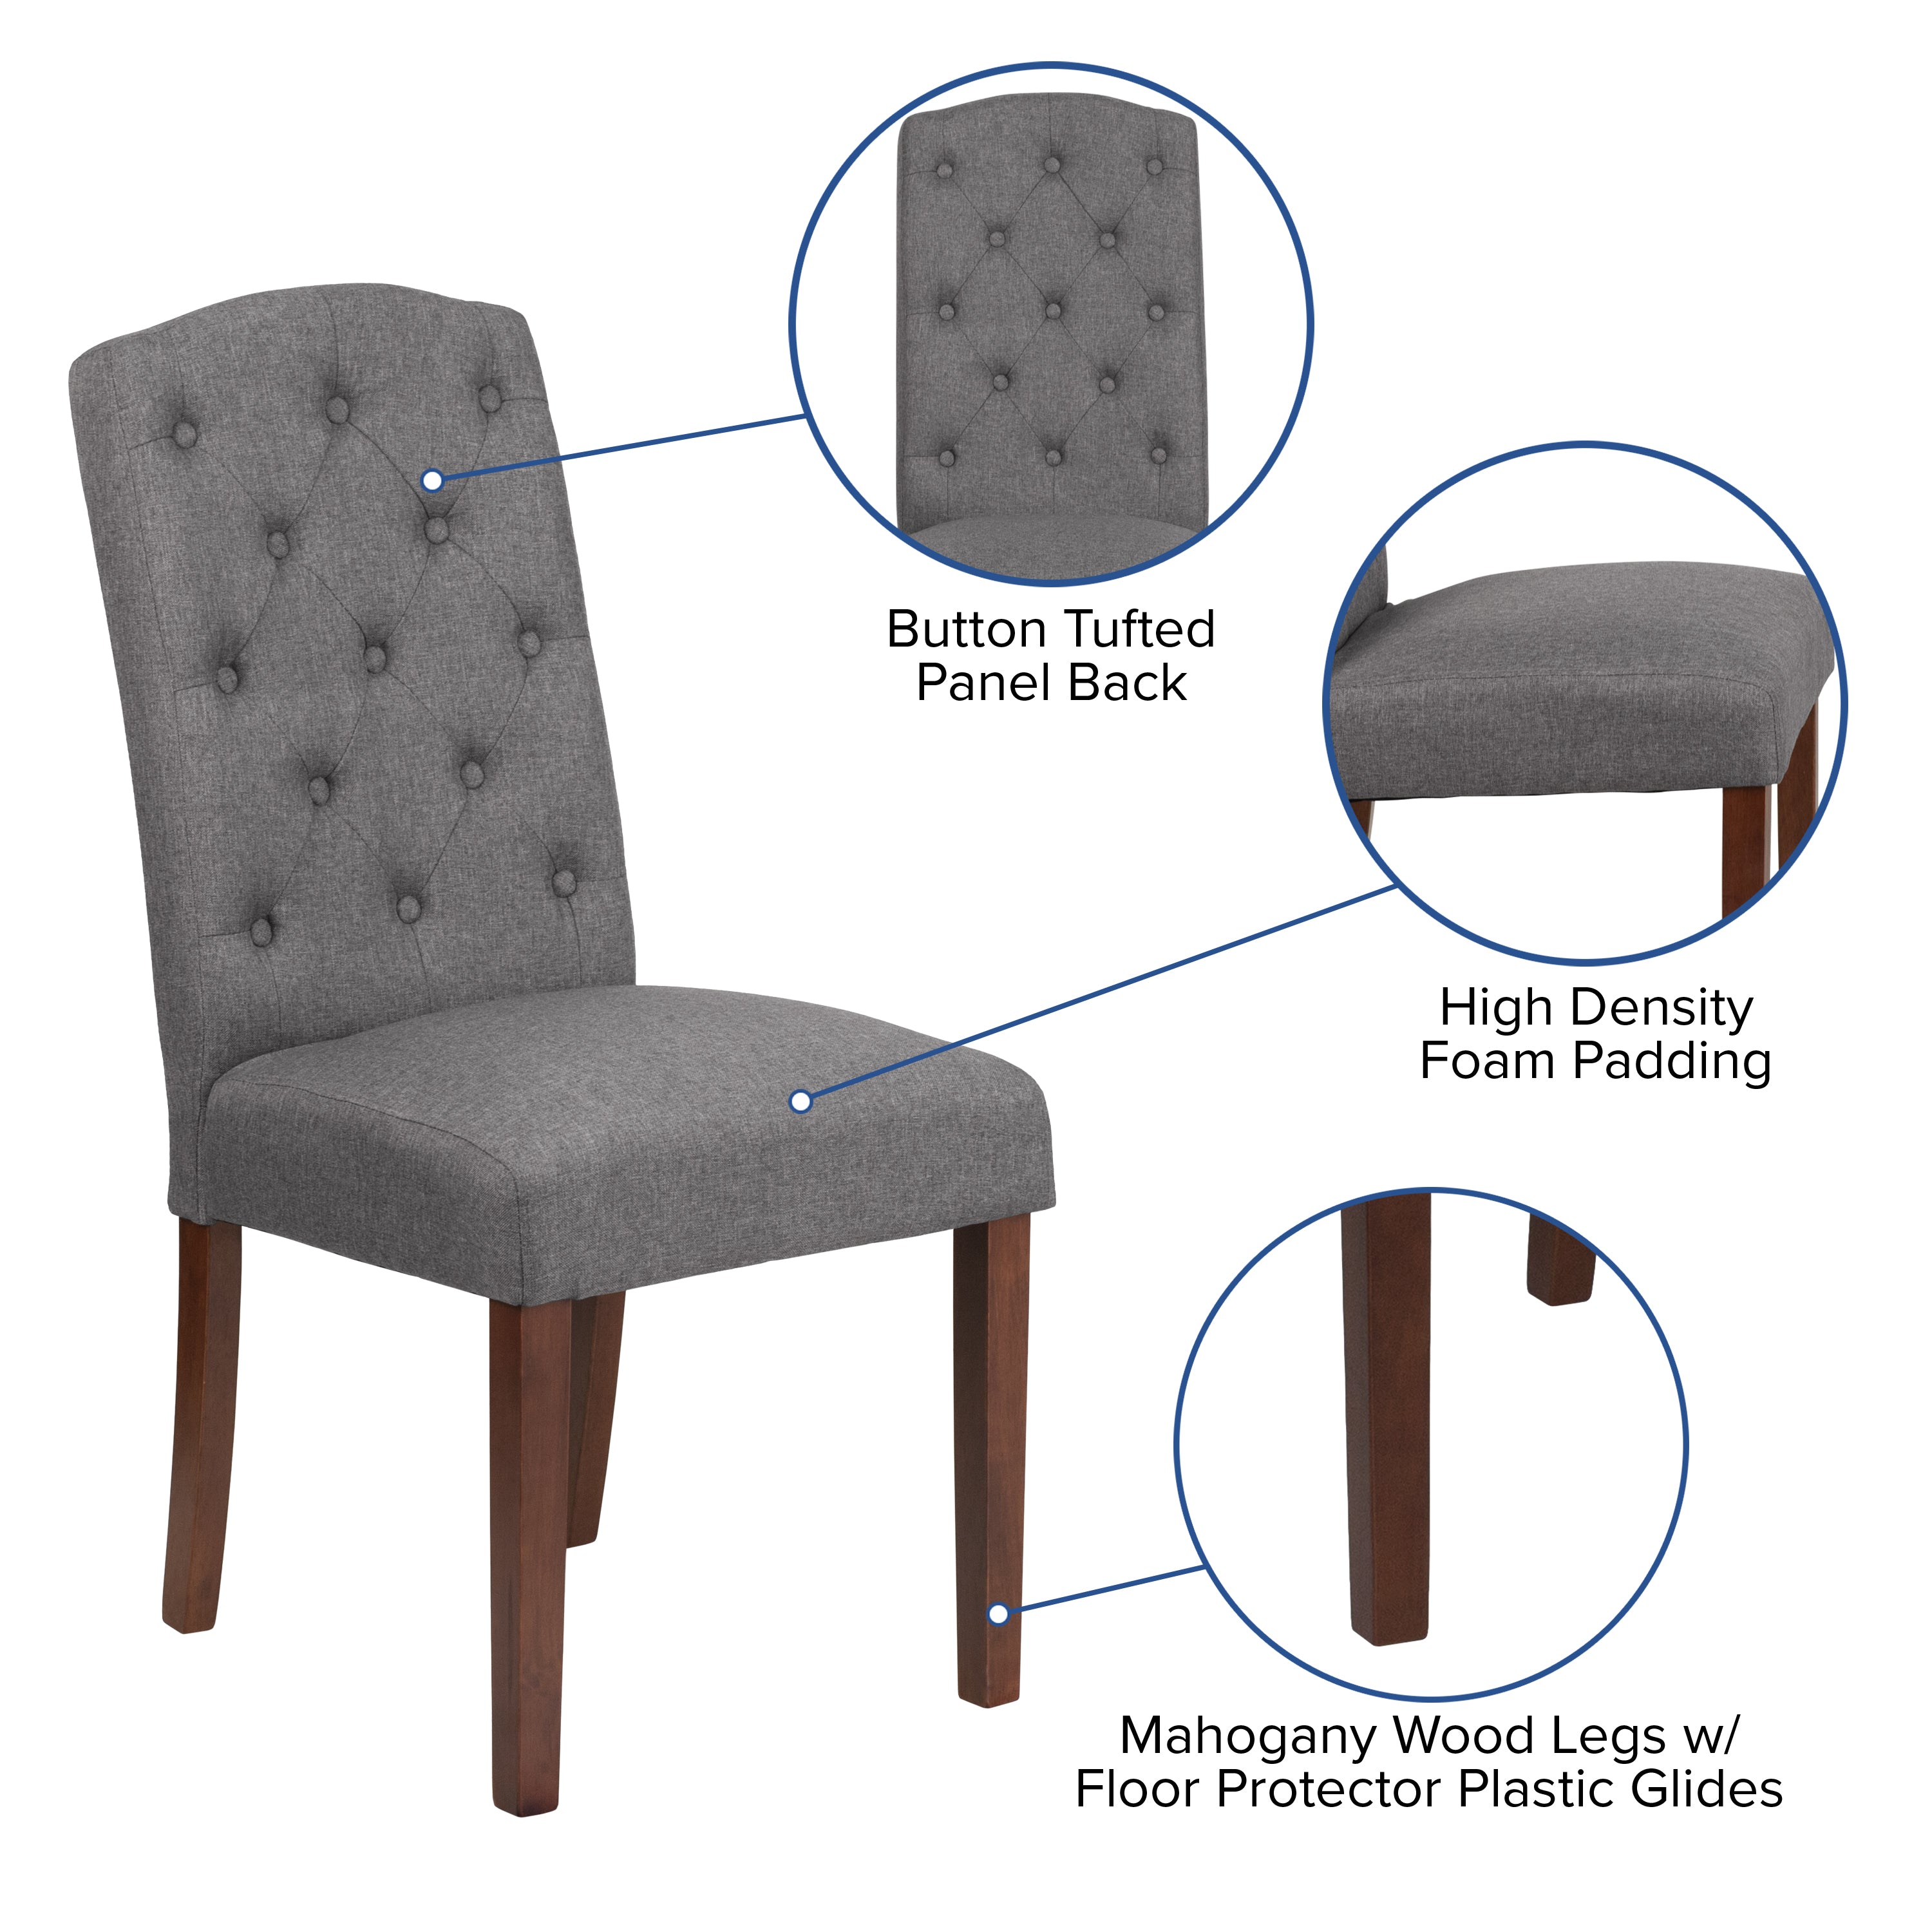 HERCULES Grove Park Series Diamond Patterned Button Tufted Parsons Chair-Dining Chair-Flash Furniture-Wall2Wall Furnishings